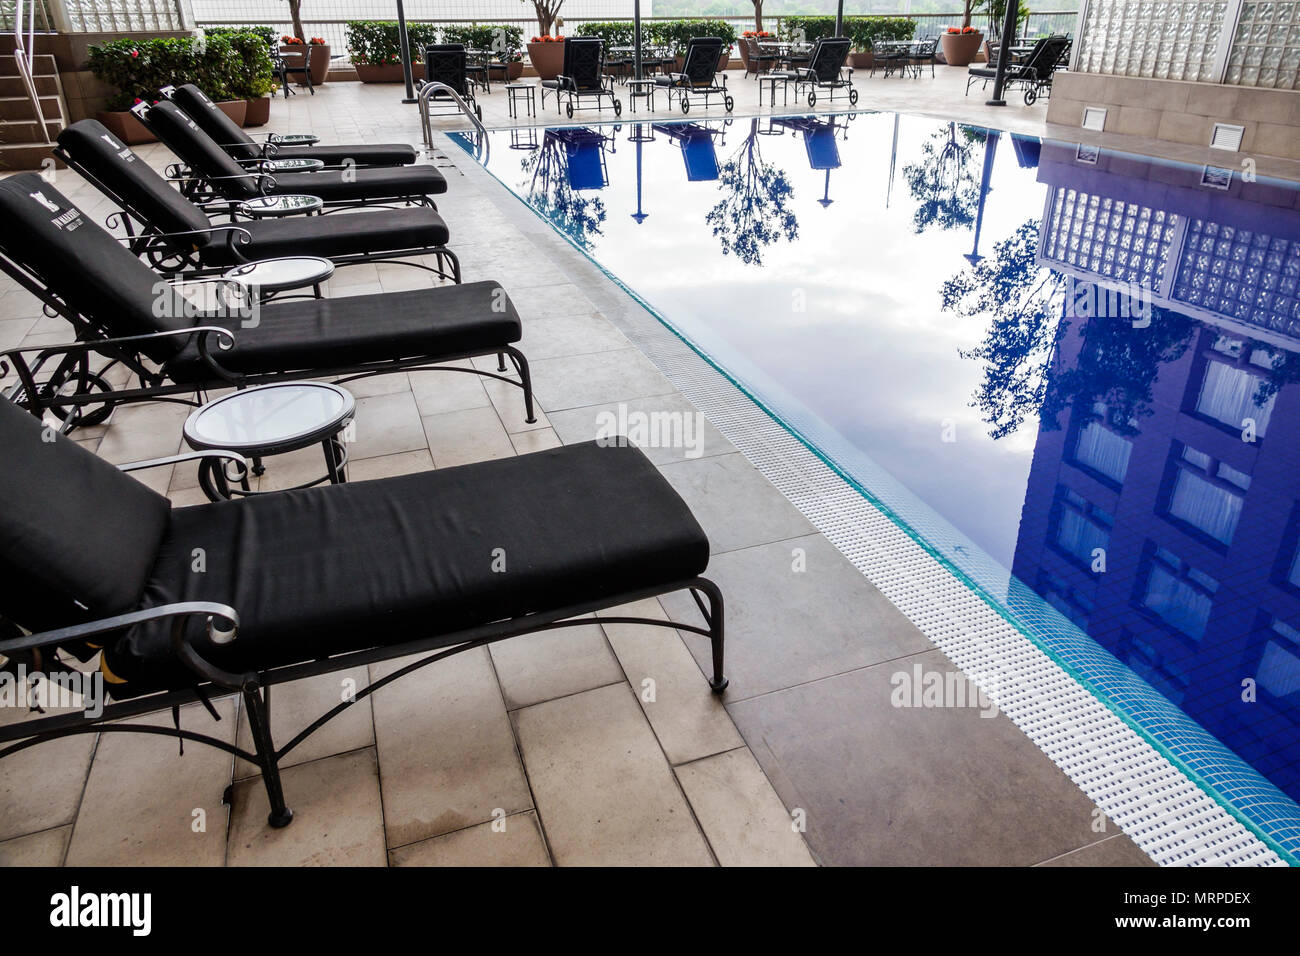 Mexico City,Polanco,Hispanic,immigrant immigrants,Mexican,JW Marriott,hotel,pool deck,water reflection,lounge chairs MX180309116 Stock Photo